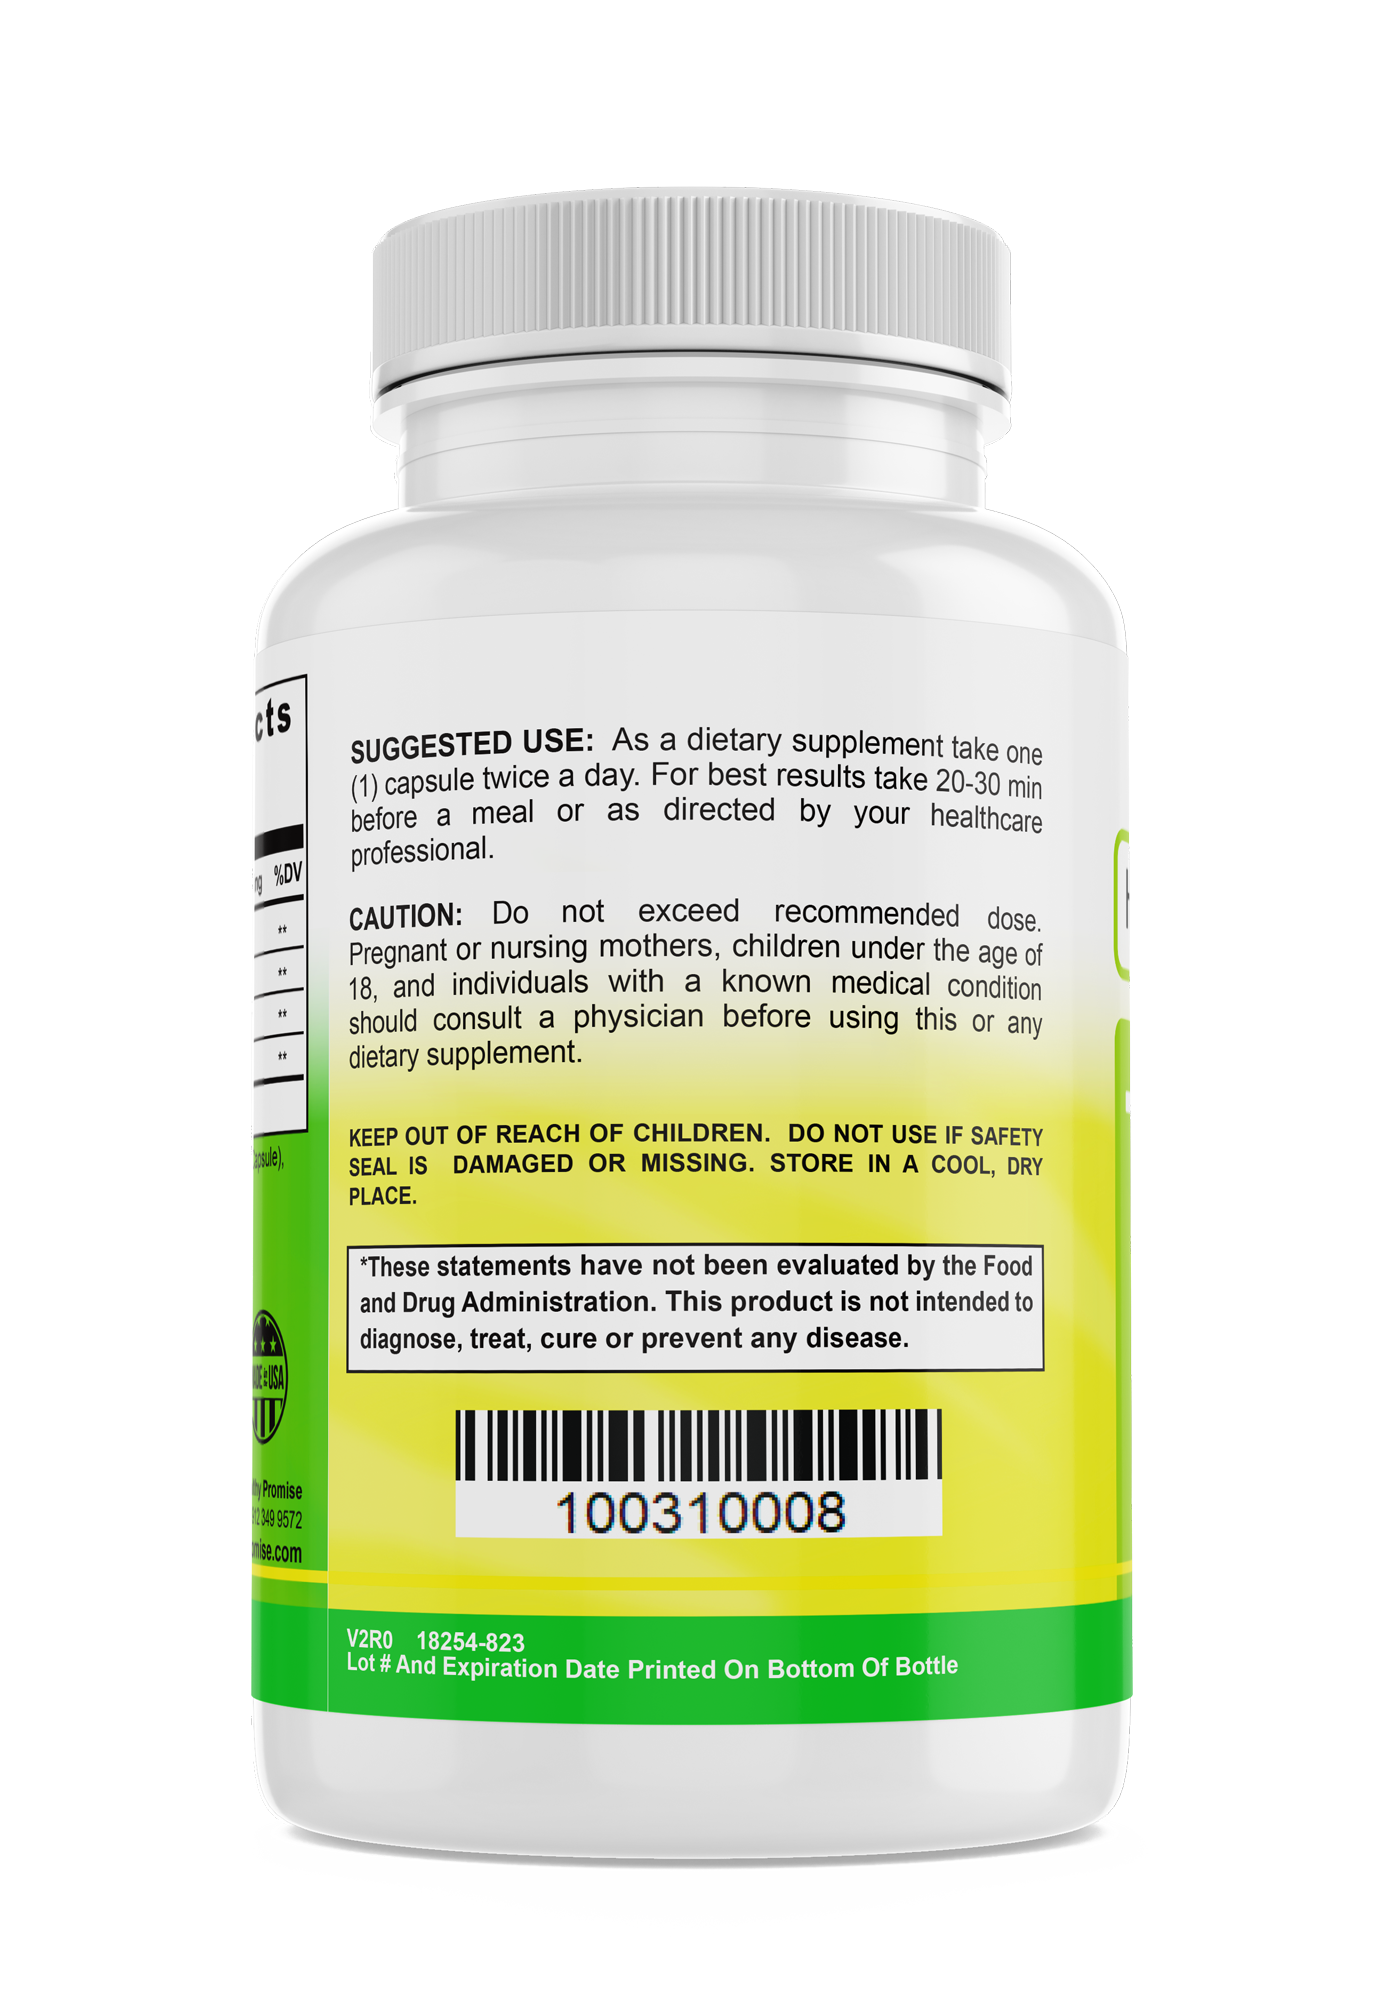 the healthy promise turmeric ginger dietary vitamin supplement bottle suggested use